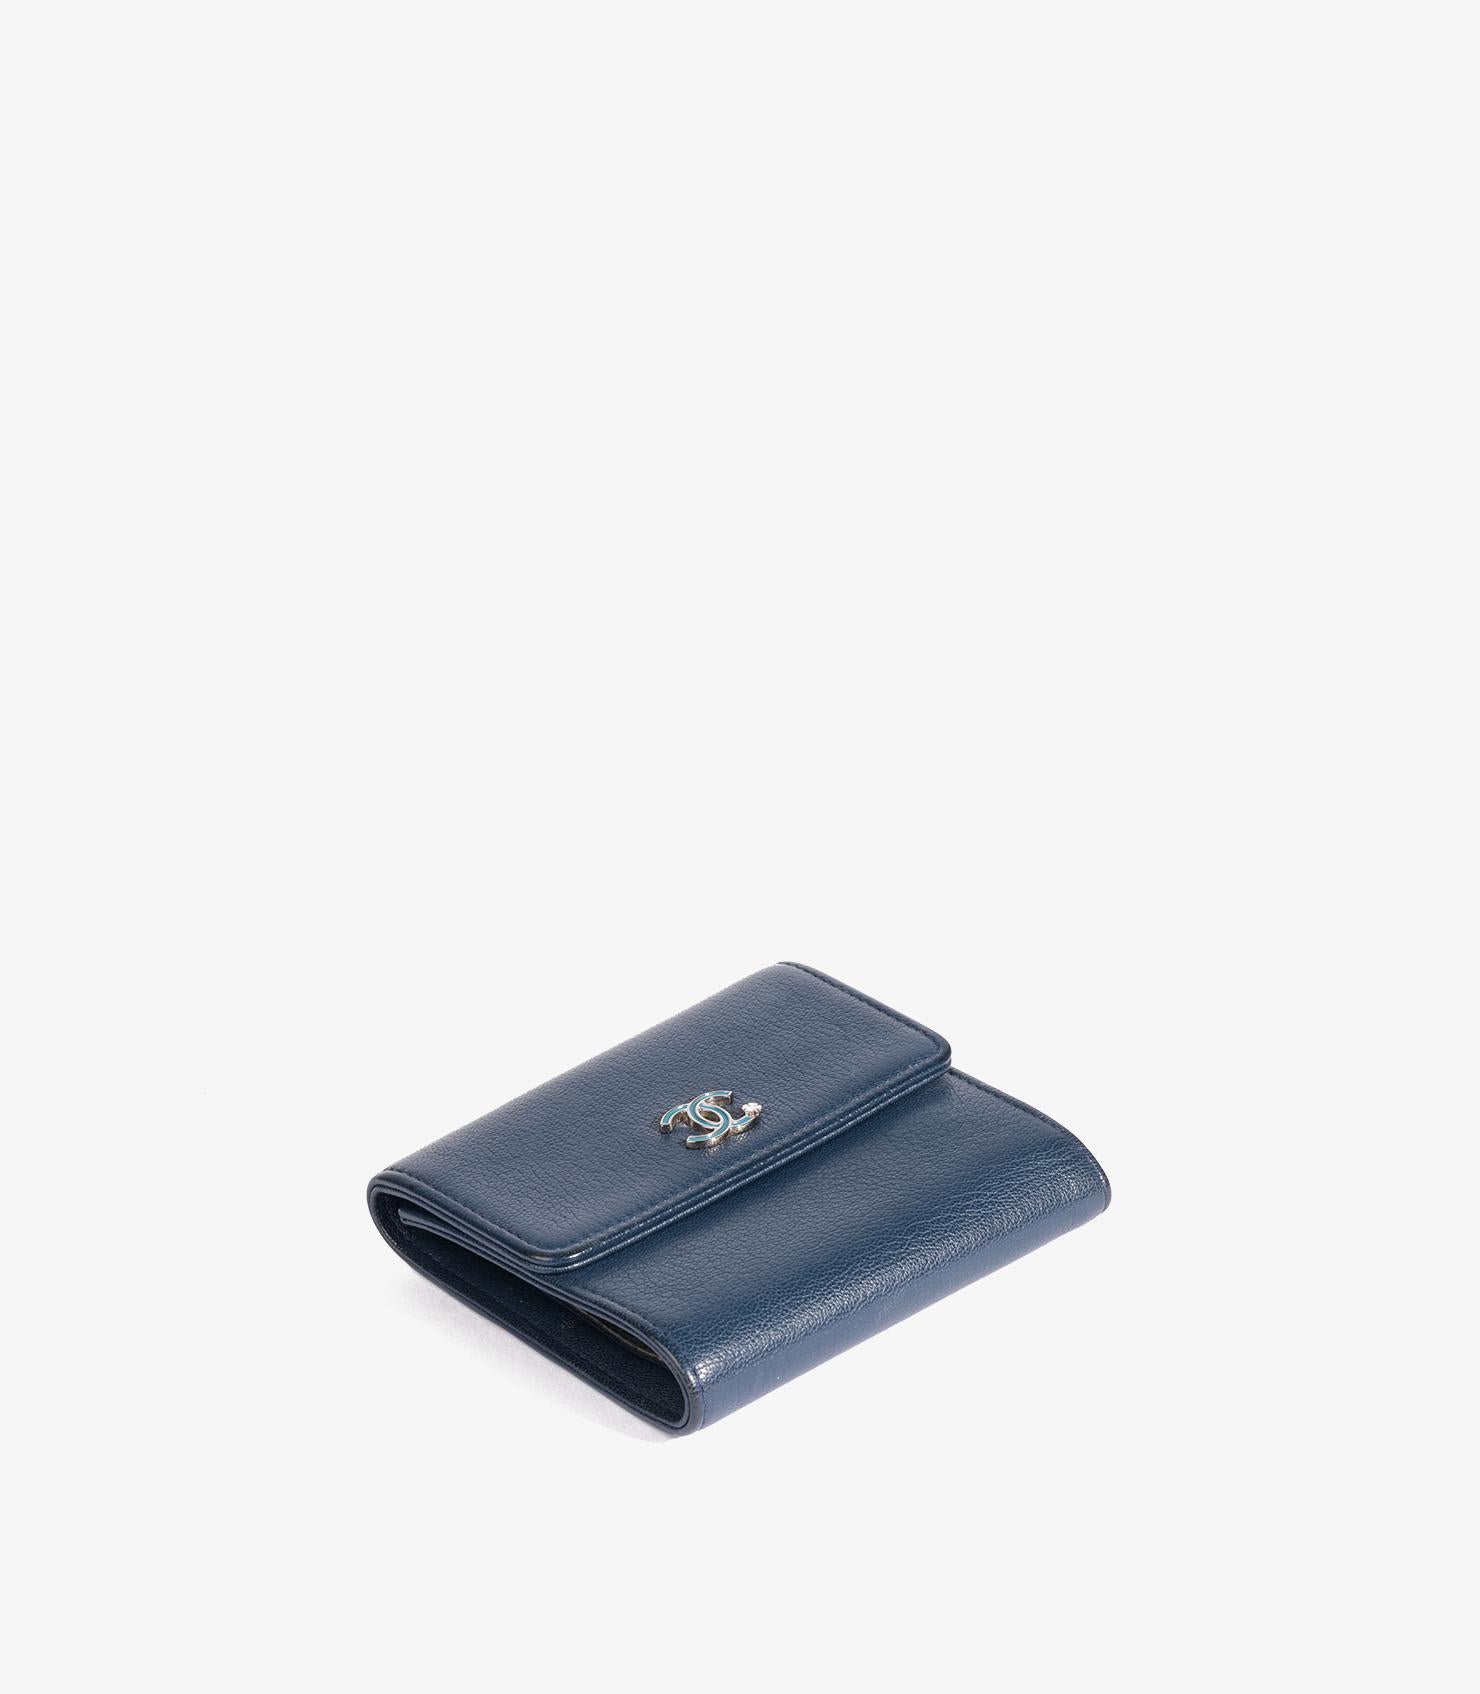 Chanel Navy Goatskin Leather Clover Compact Wallet

Brand- Chanel
Model- Clover Compact Wallet
Product Type- Wallet
Serial Number- 24******
Age- Circa 2017
Accompanied By- Chanel Authenticity Card
Colour- Navy
Hardware- Silver
Material(s)- Goatskin